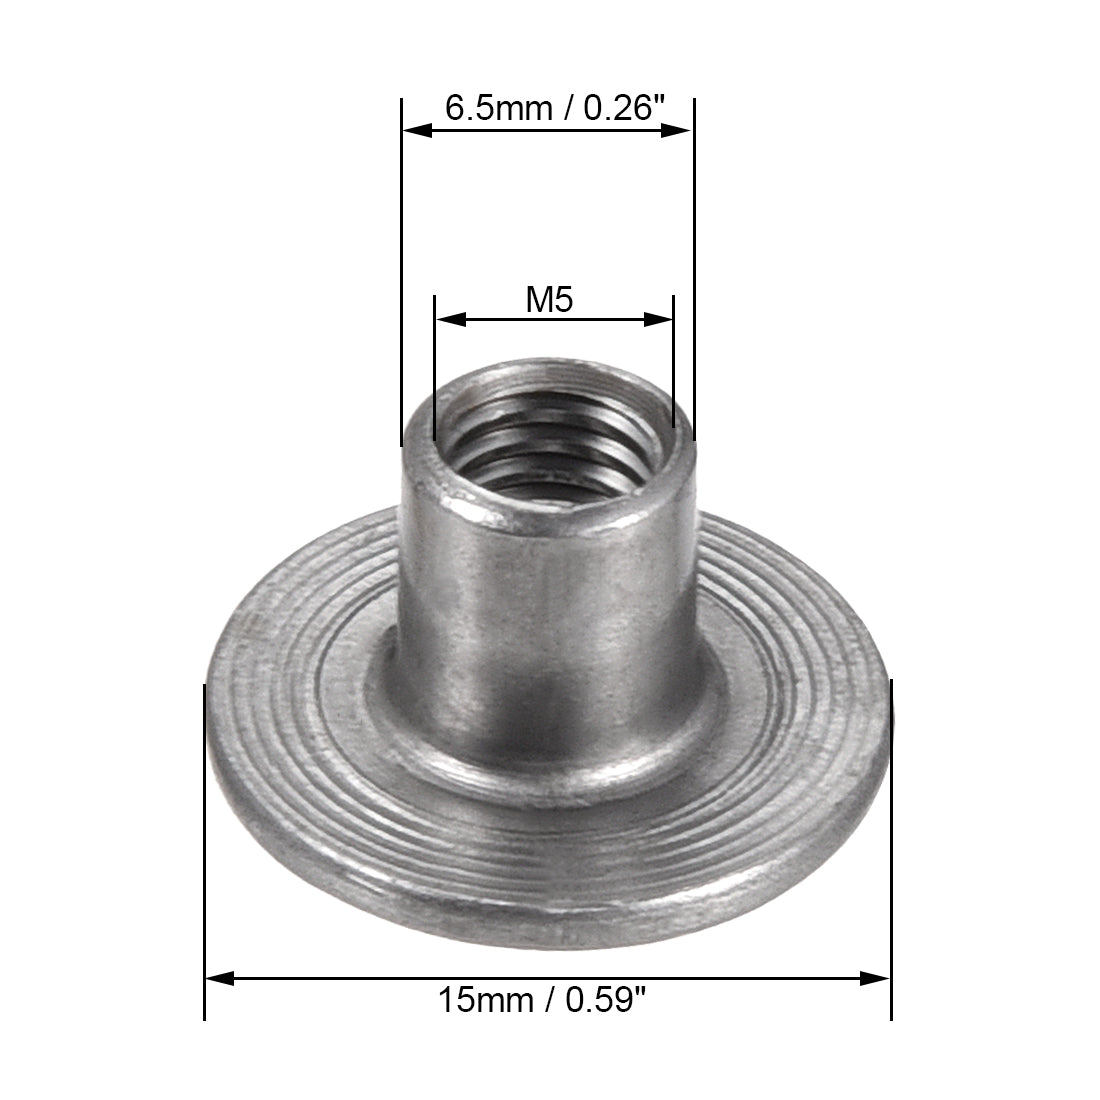 uxcell Uxcell Brad Hole Tee Nut, Carbon Steel Round Base Screw-In T-Nut